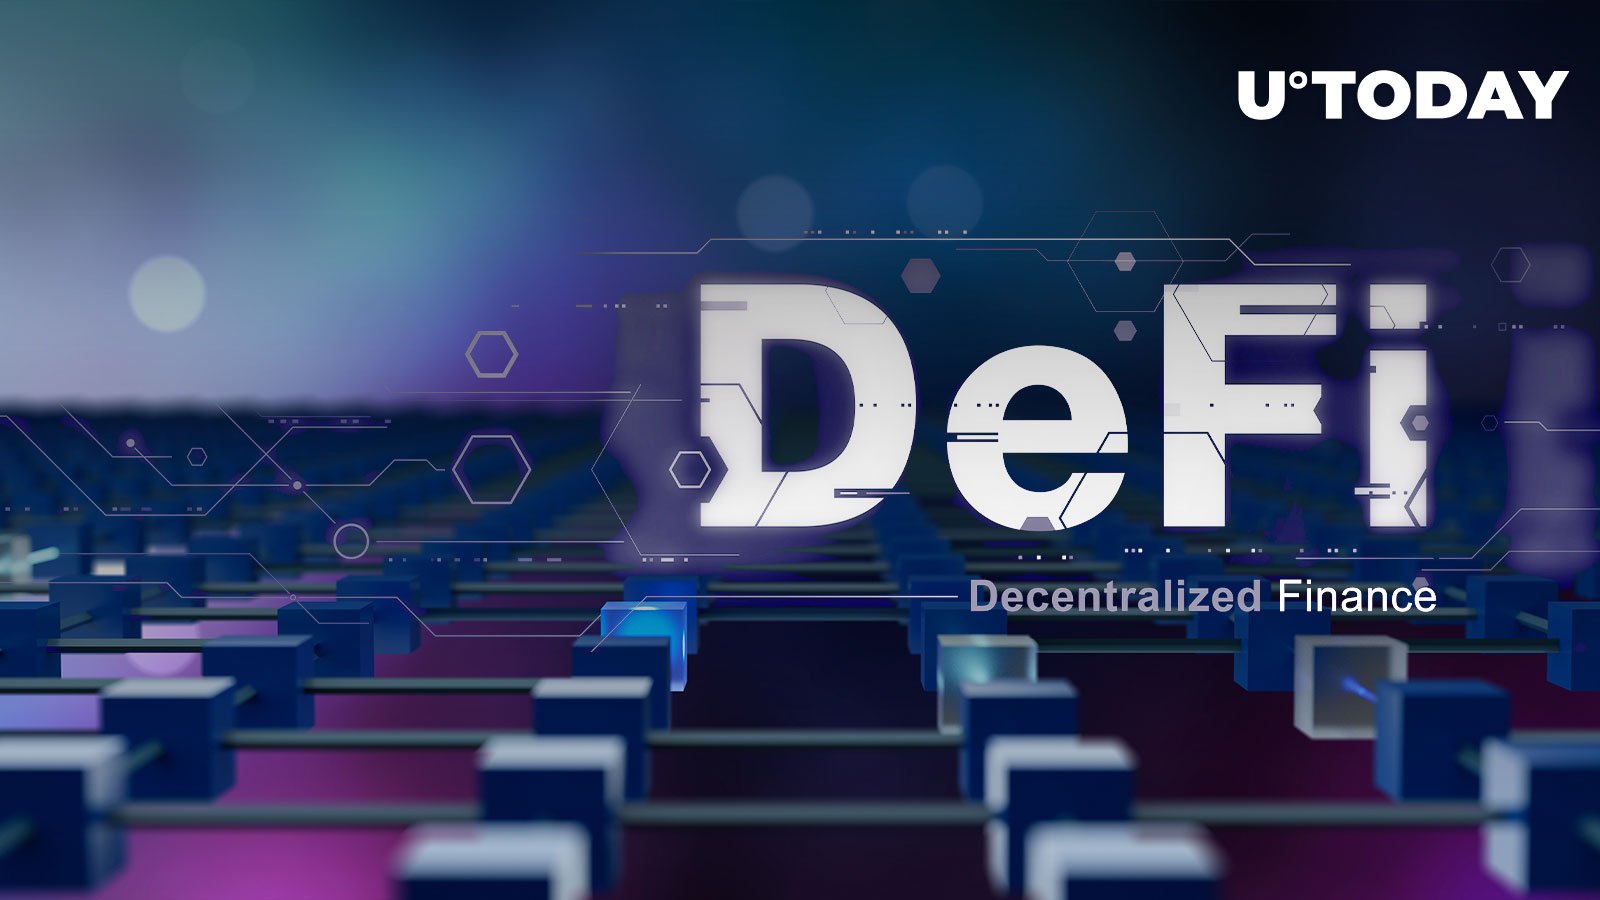 These DeFi Tokens Are Really Innovative: Analyst